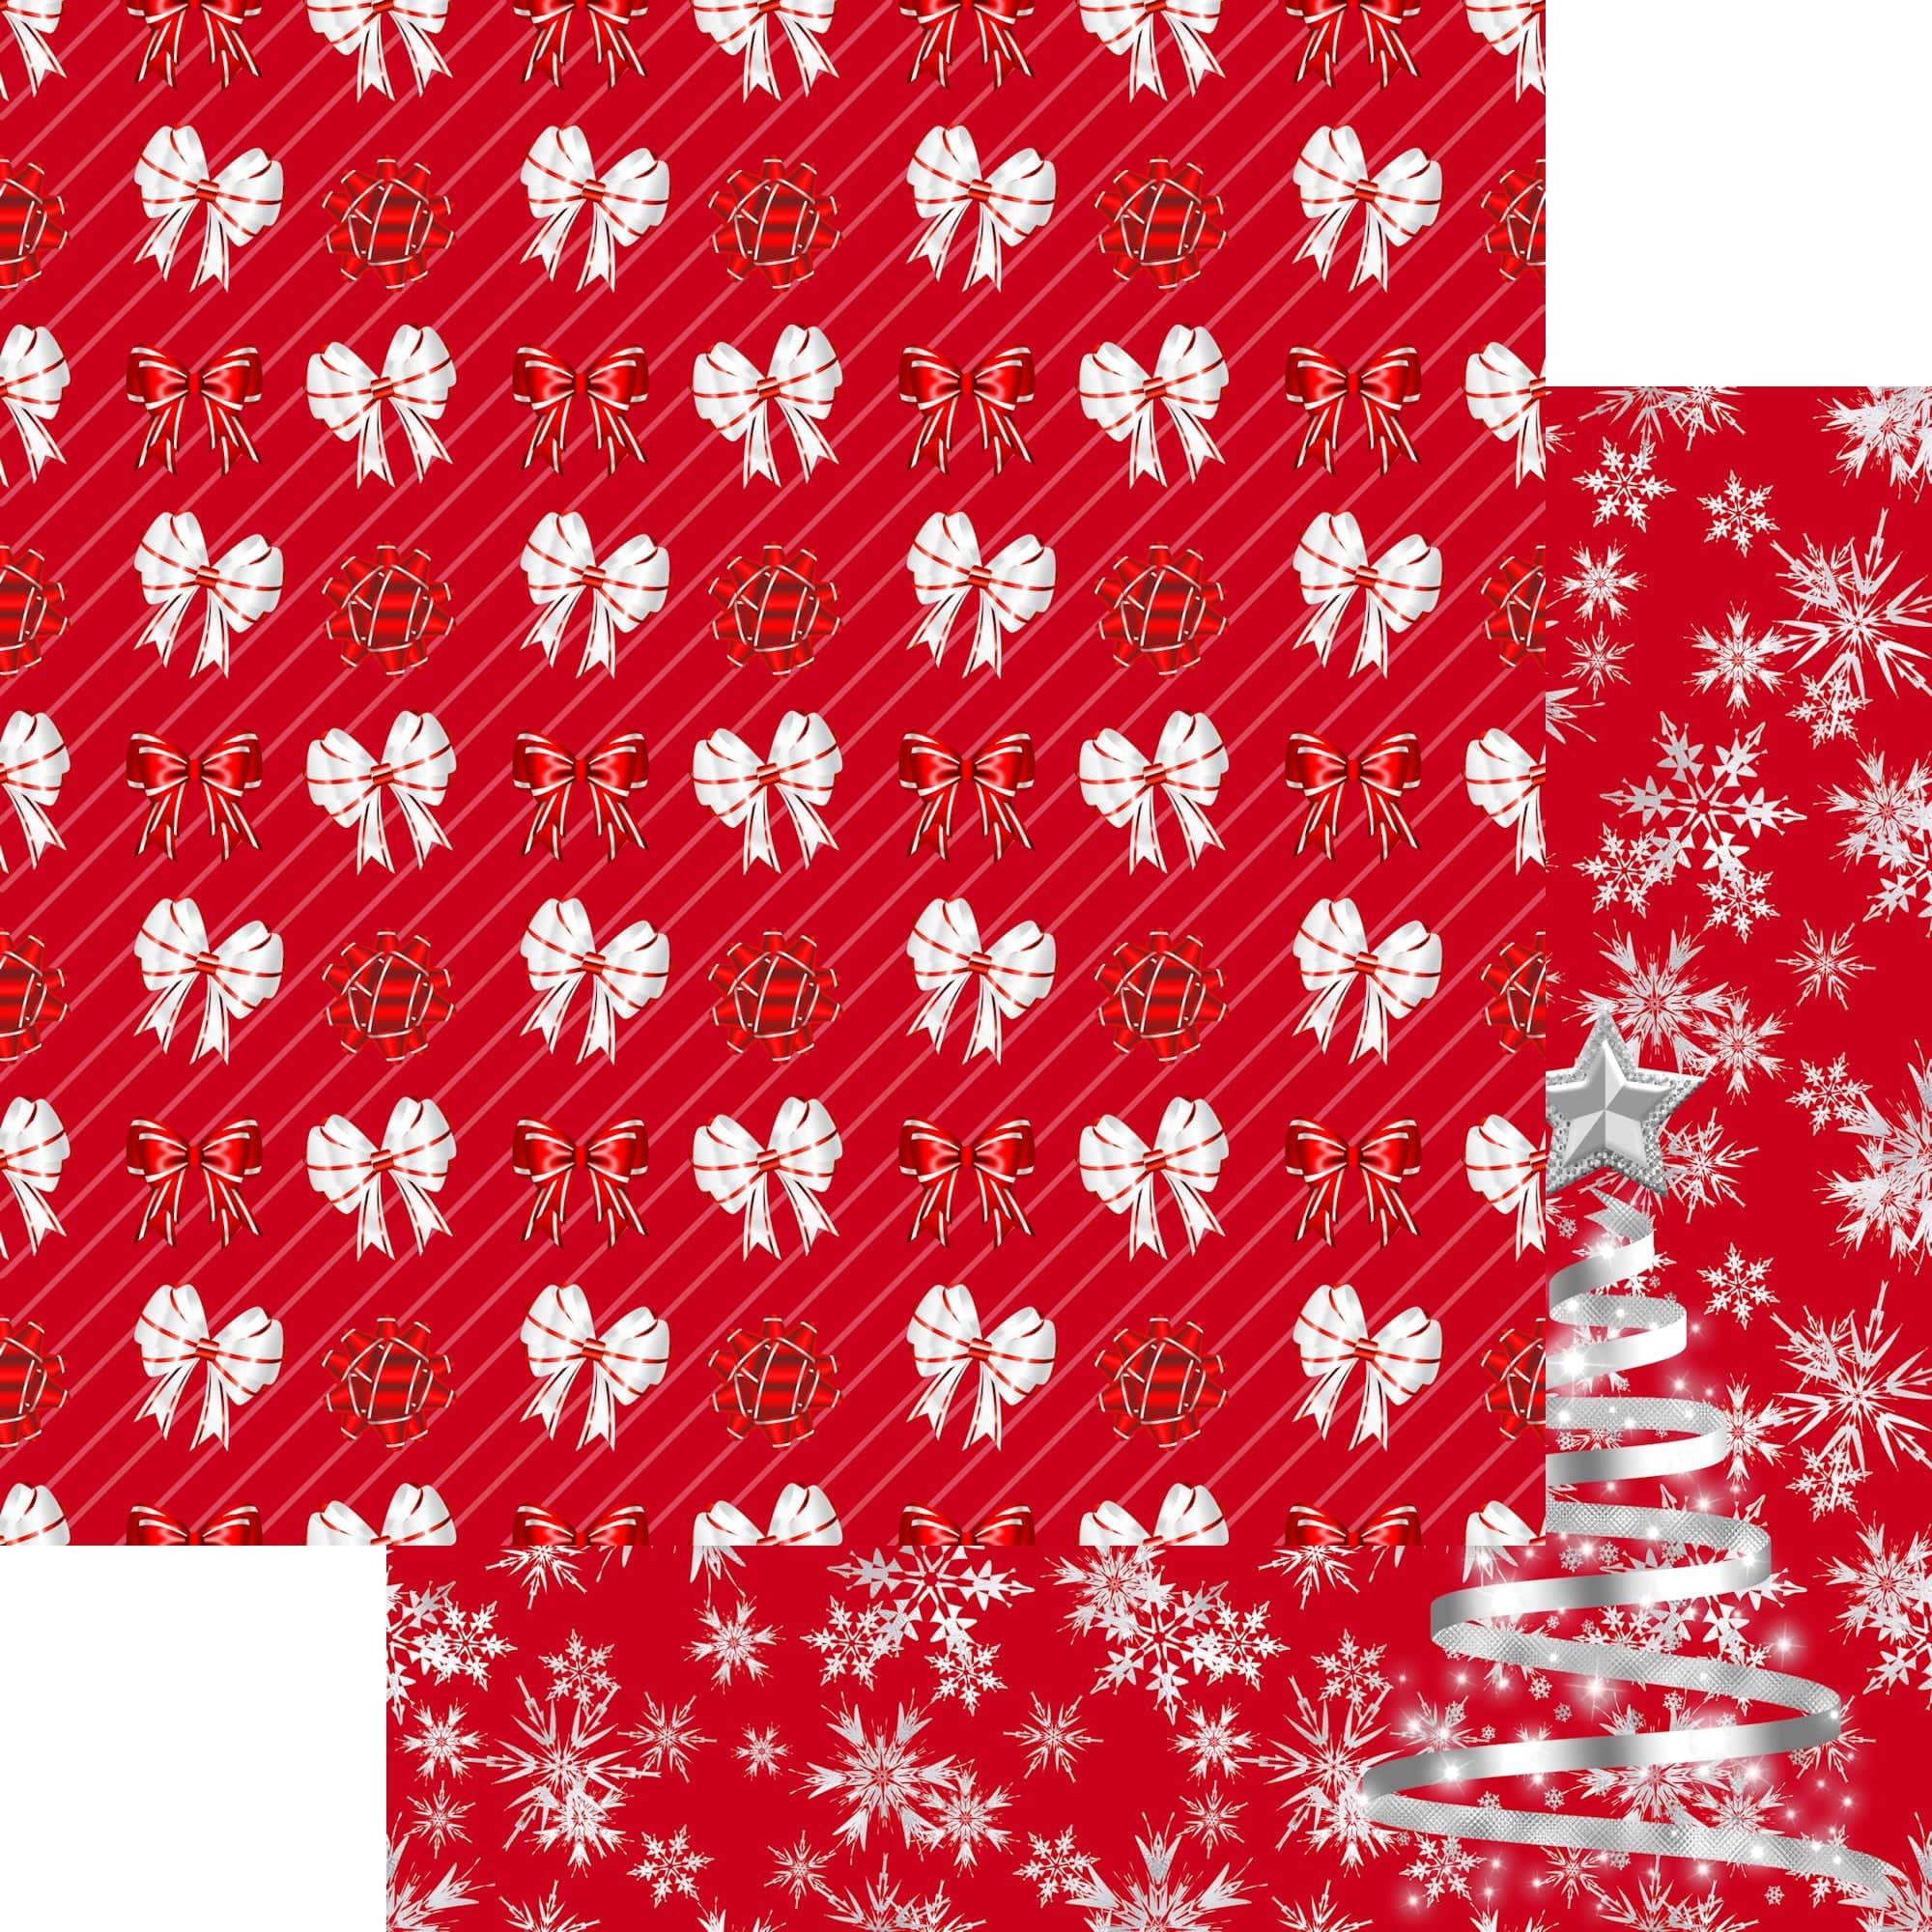 Peppermint Christmas Collection Snazzy Snowflakes 12 x 12 Double-Sided Scrapbook Paper by SSC Designs - Scrapbook Supply Companies